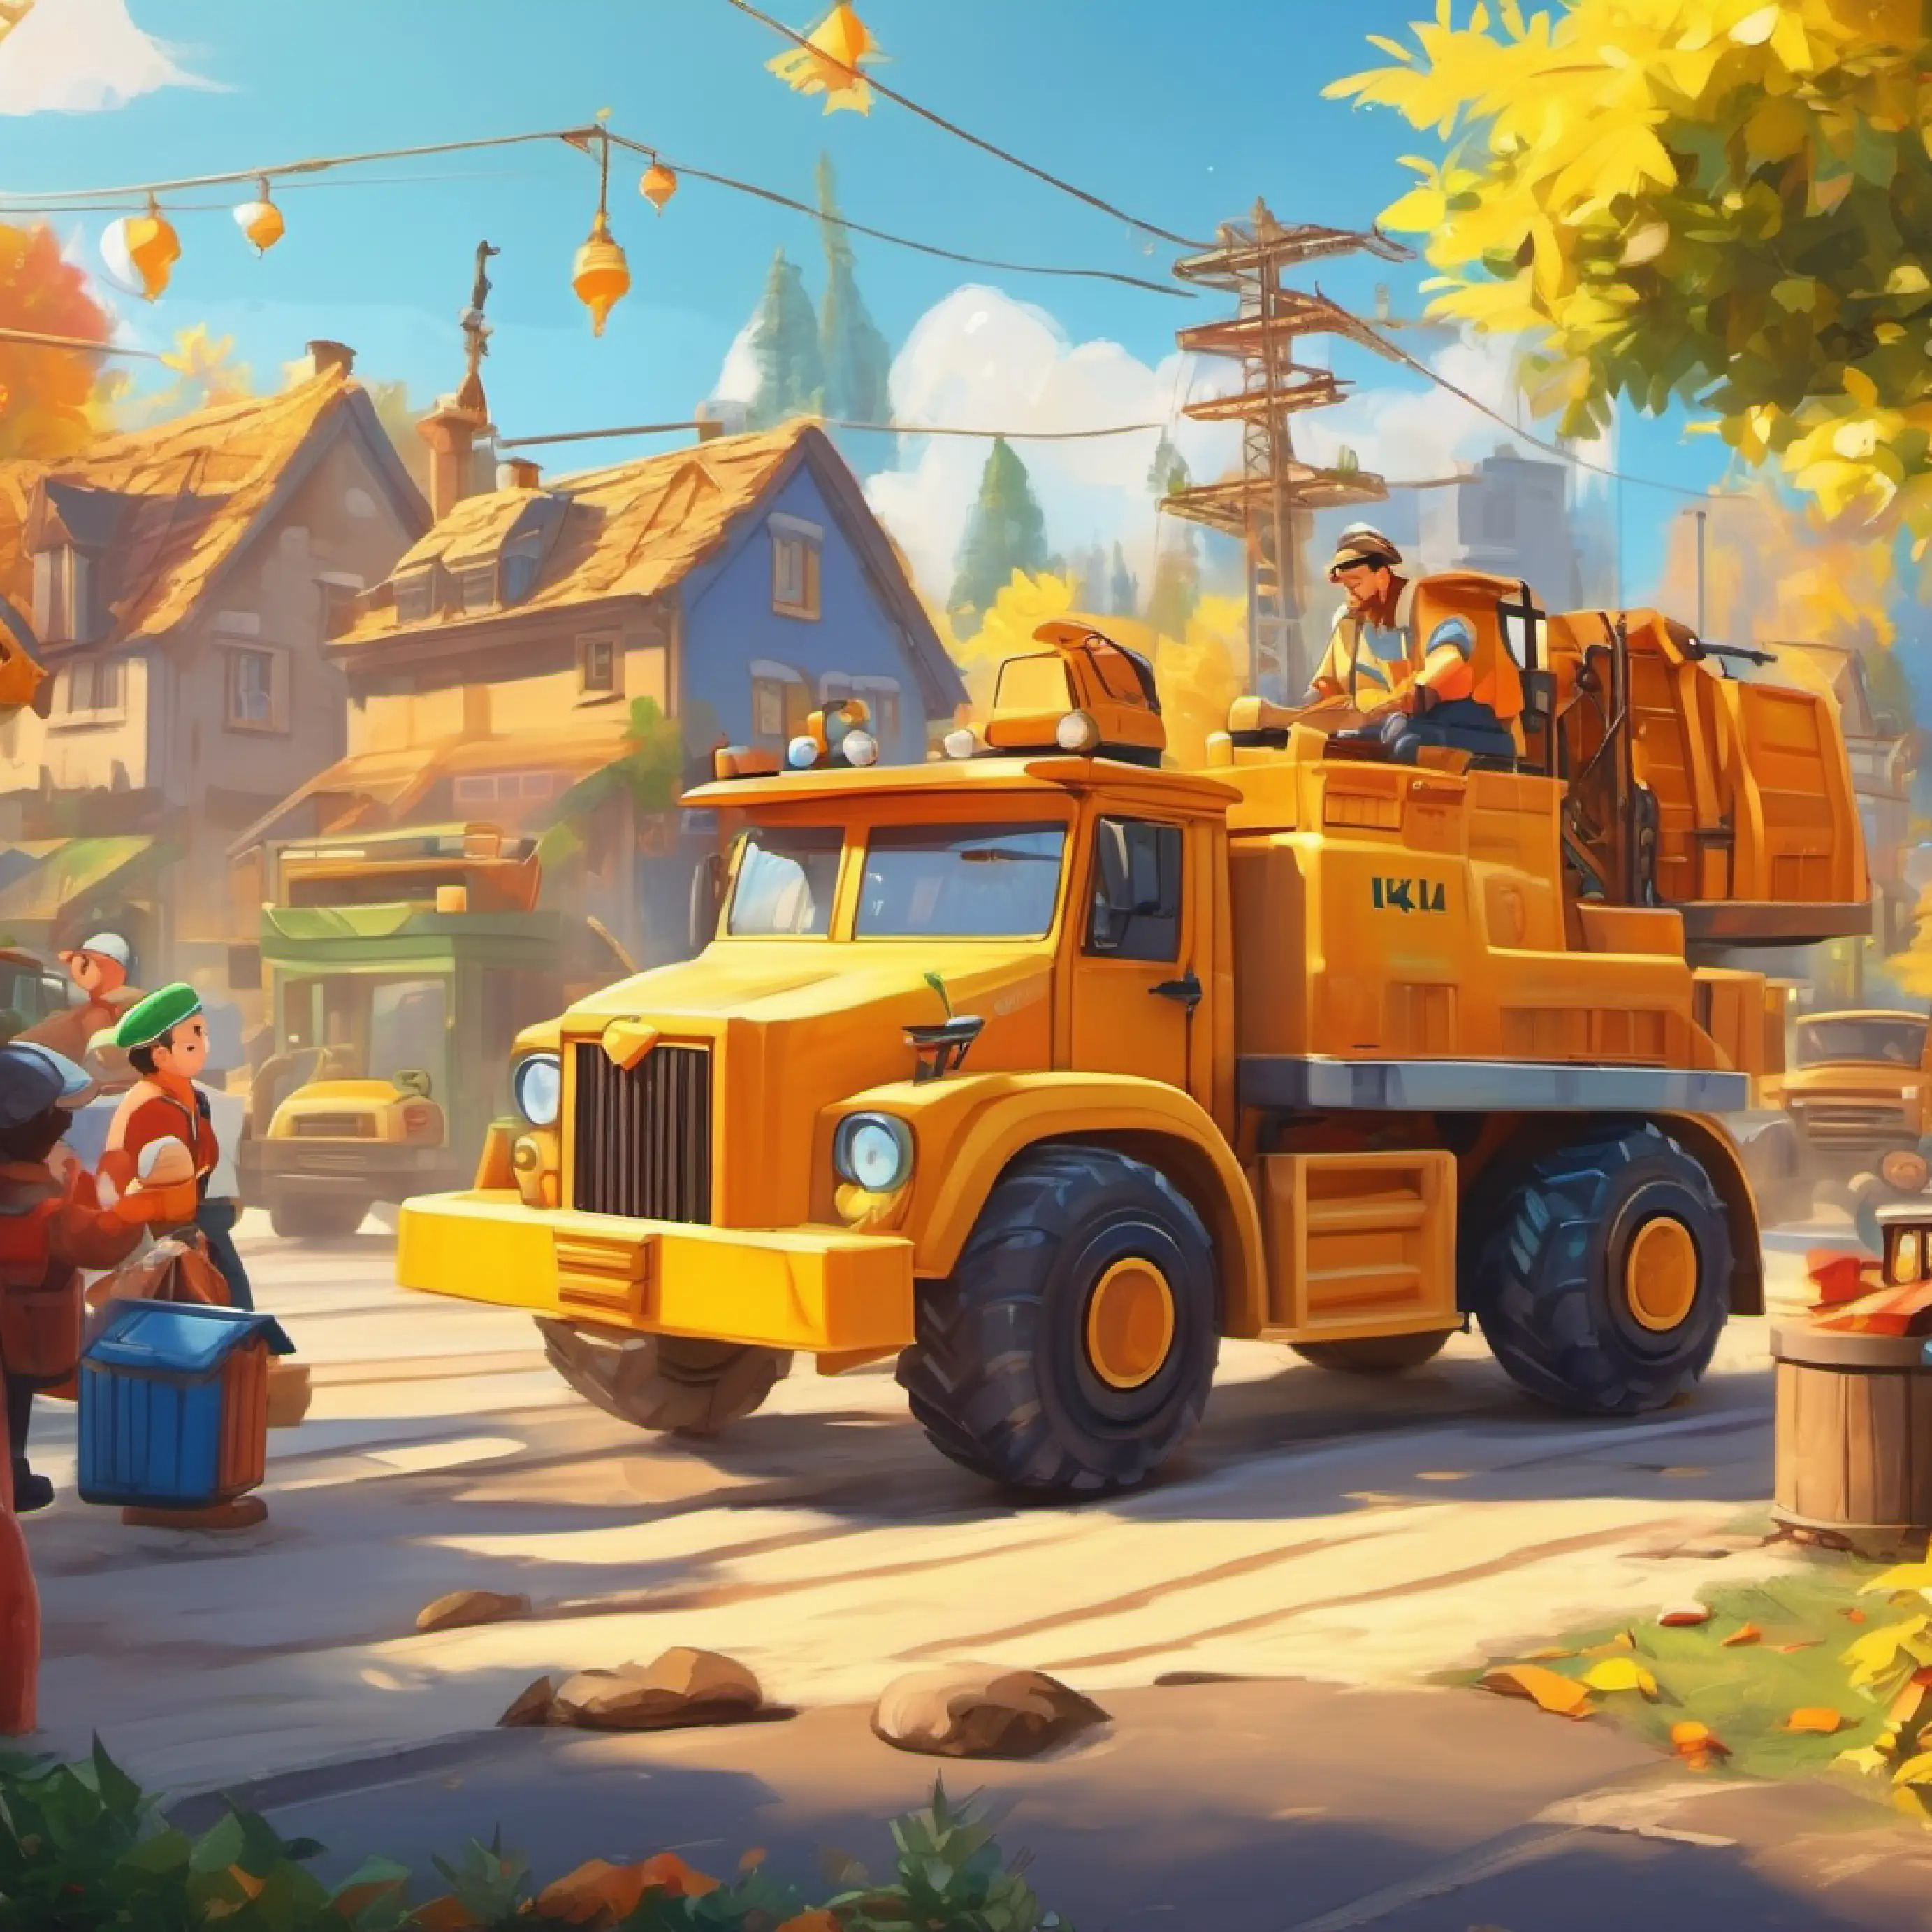 Introducing characters, construction vehicles, sunny morning